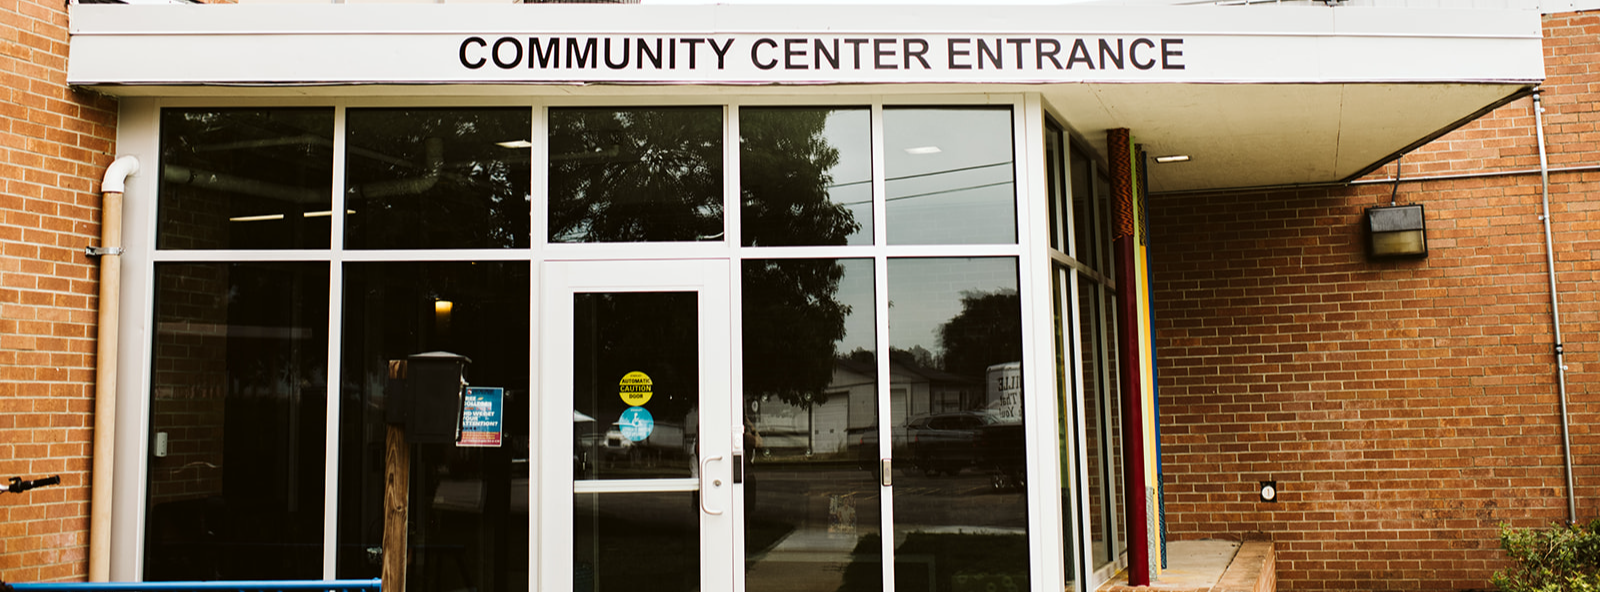 Front entrance to Community Center (front doors and glass windows)